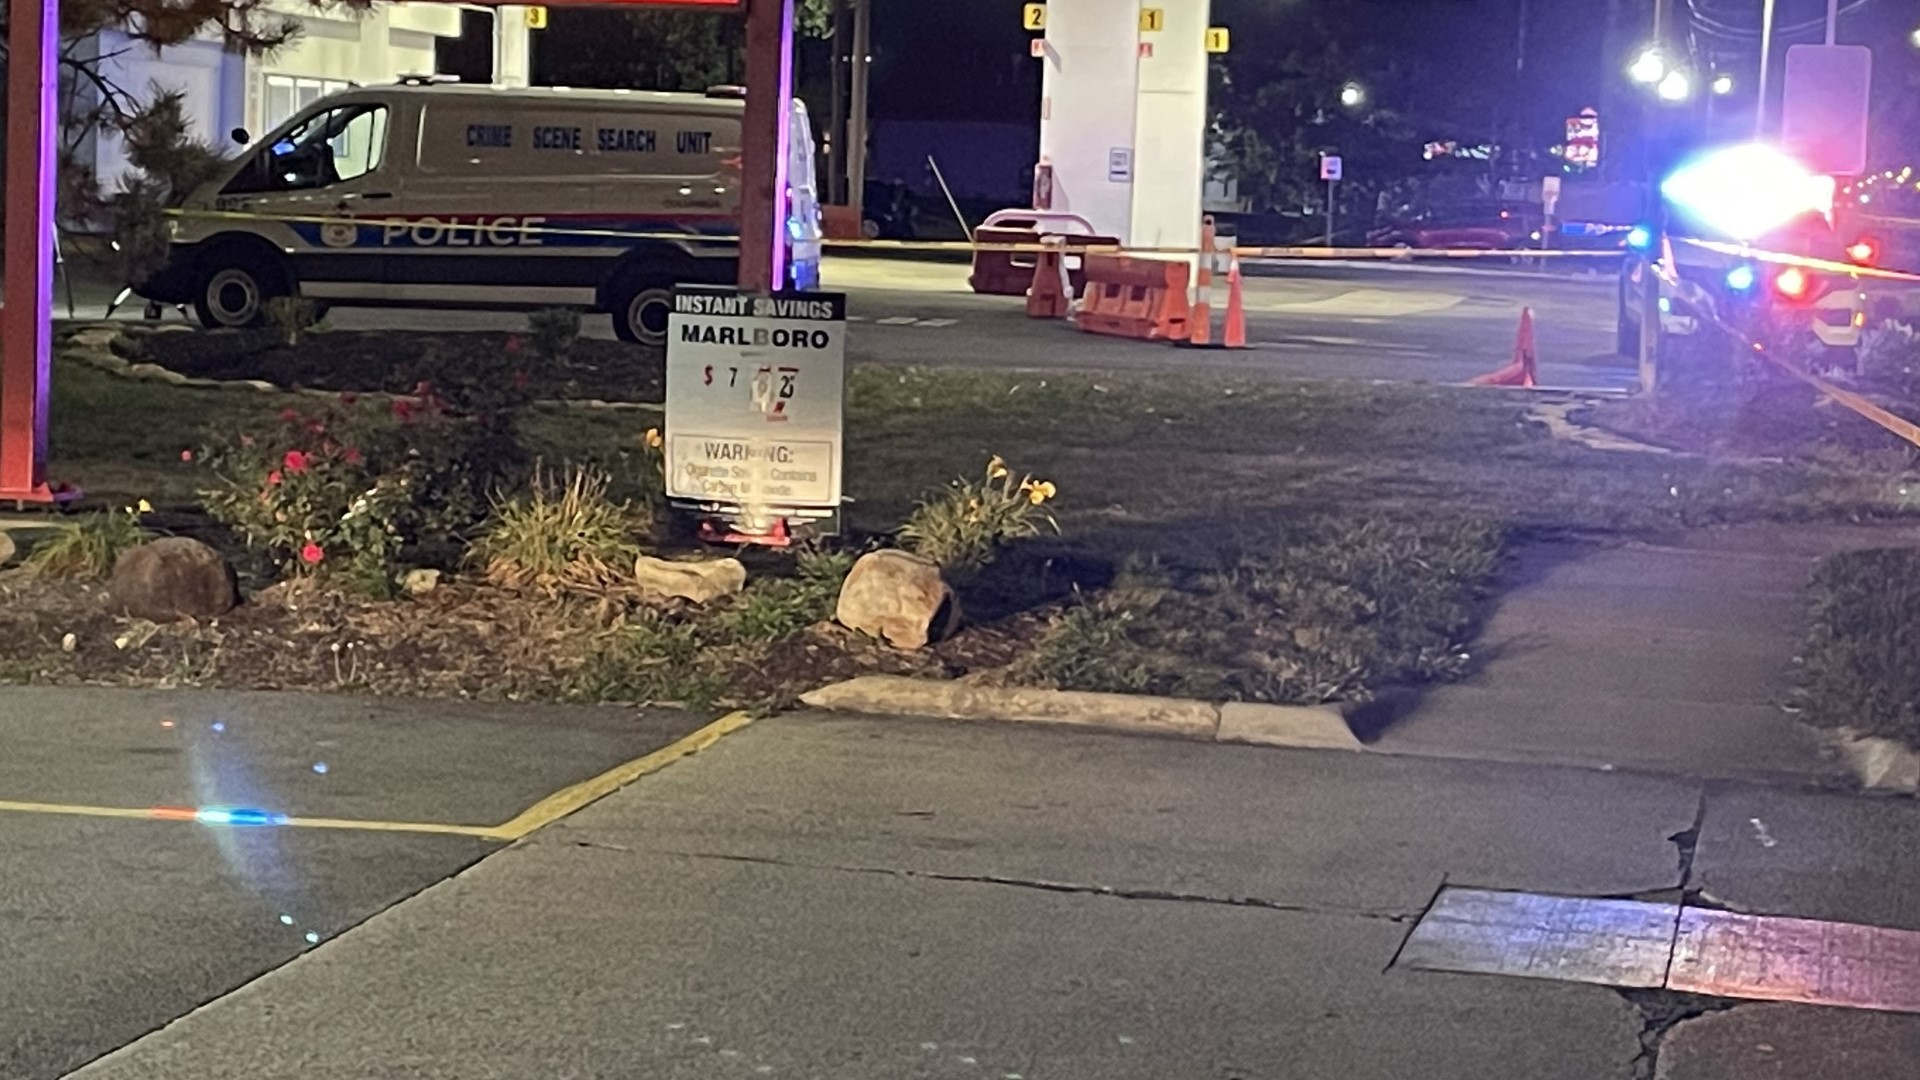 One person was killed near a bus terminal in west Columbus late Sunday night, police said. A suspect was arrested in connection with the incident.